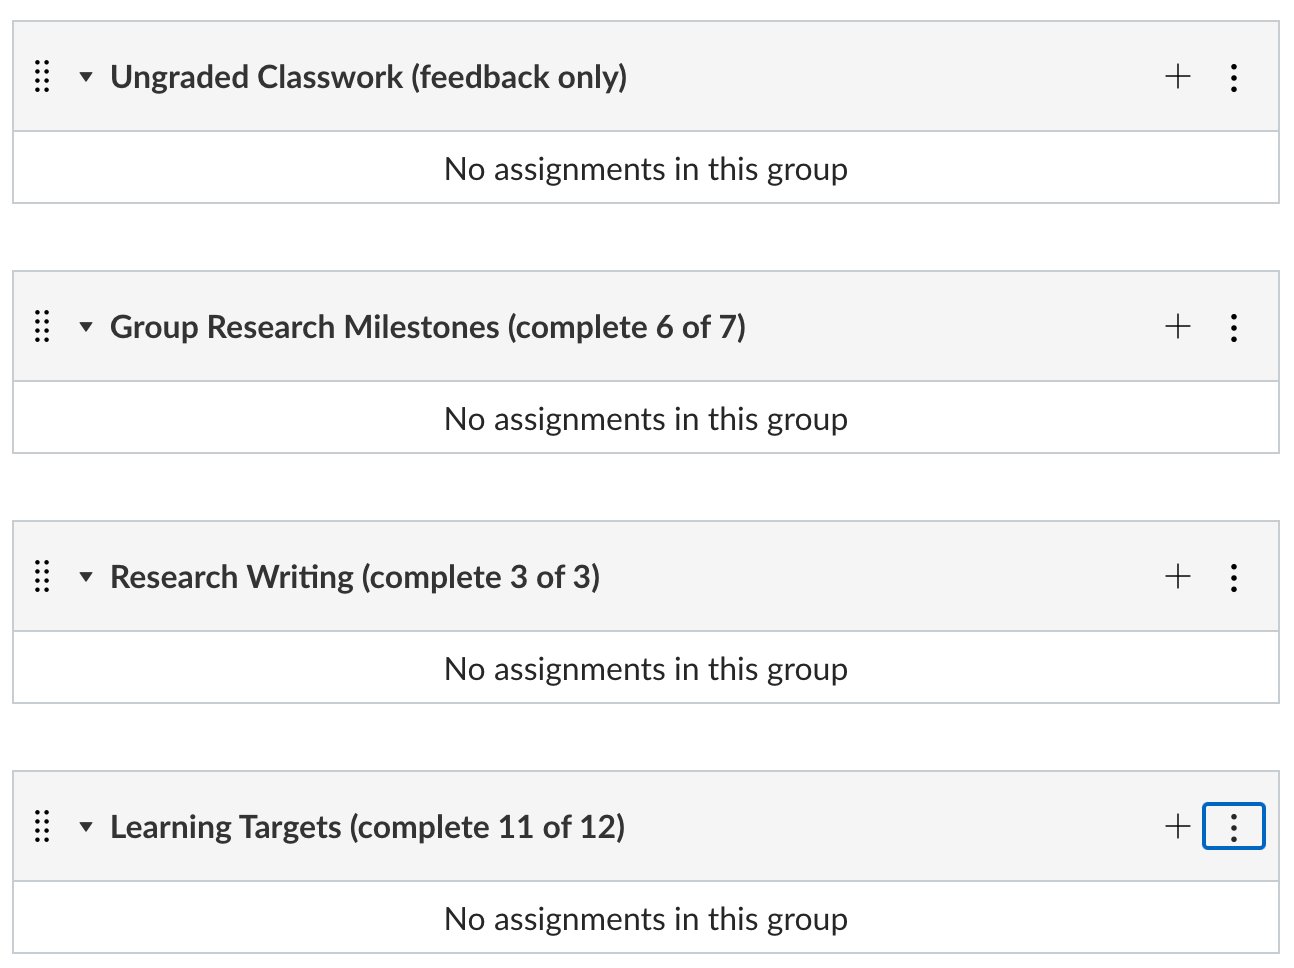 A list of assignment groups, including "Group Research Milestones (complete 6 of 7)" and several others of a similar type.